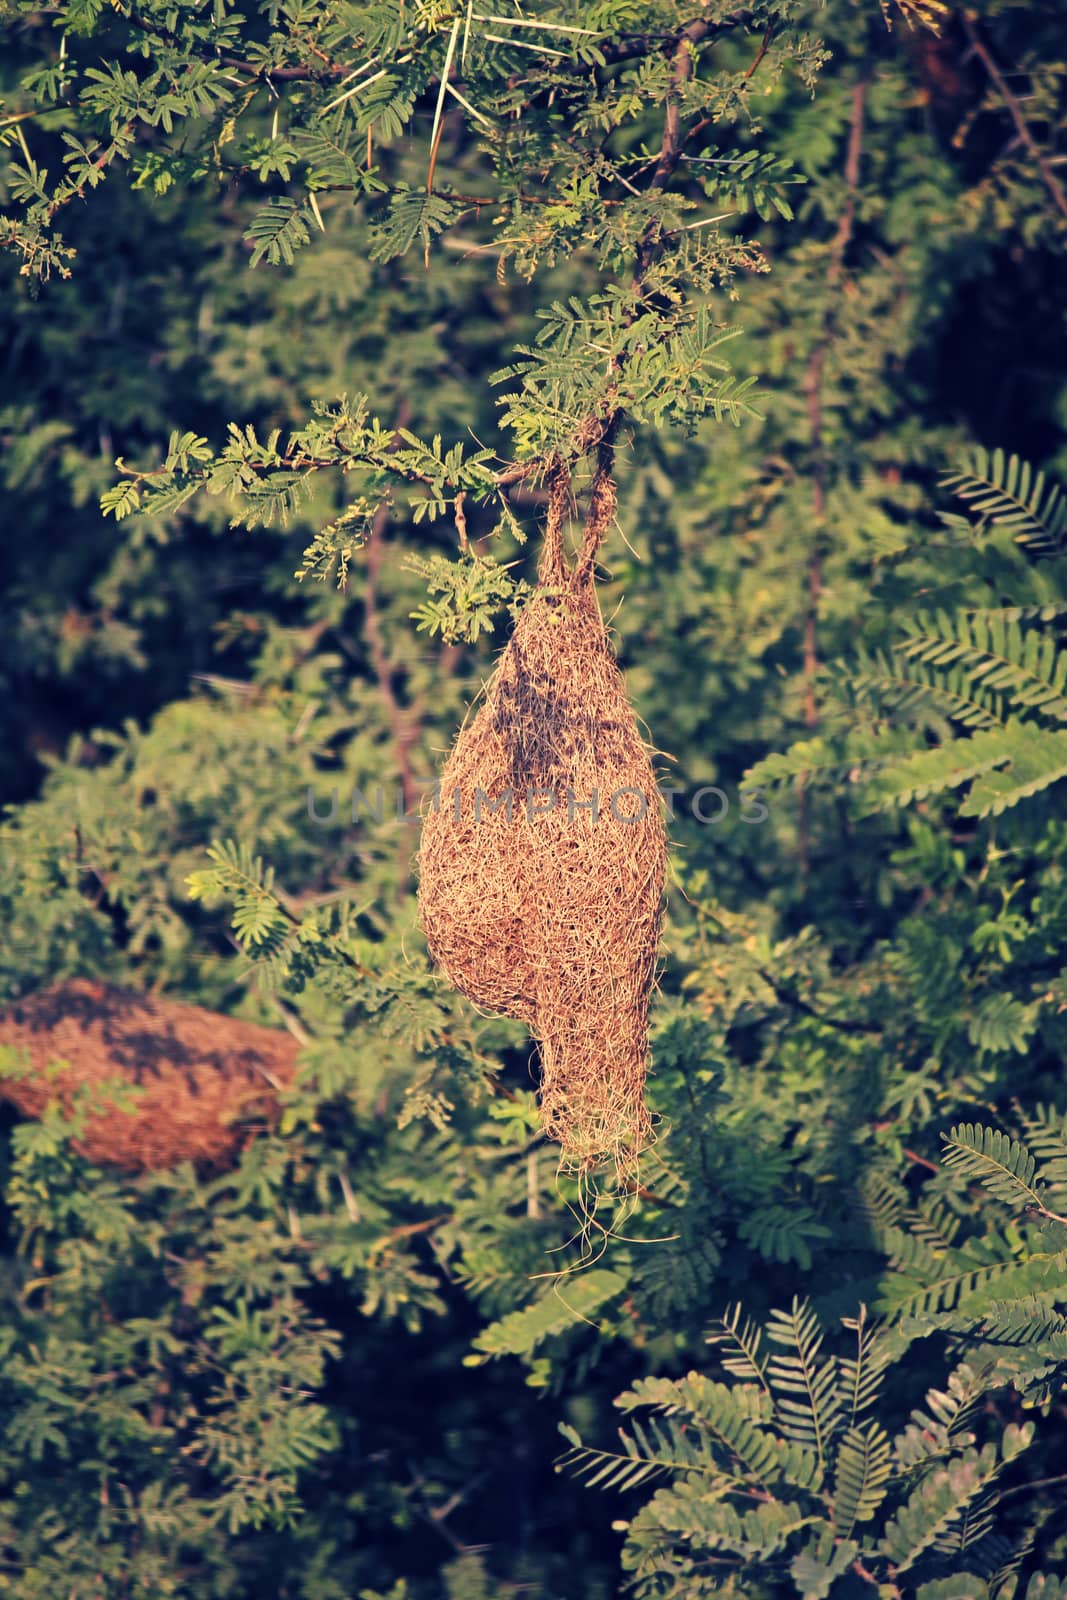 Nests of weaver birds. The Ploceidae, or weavers, are small passerine birds related to the finches.